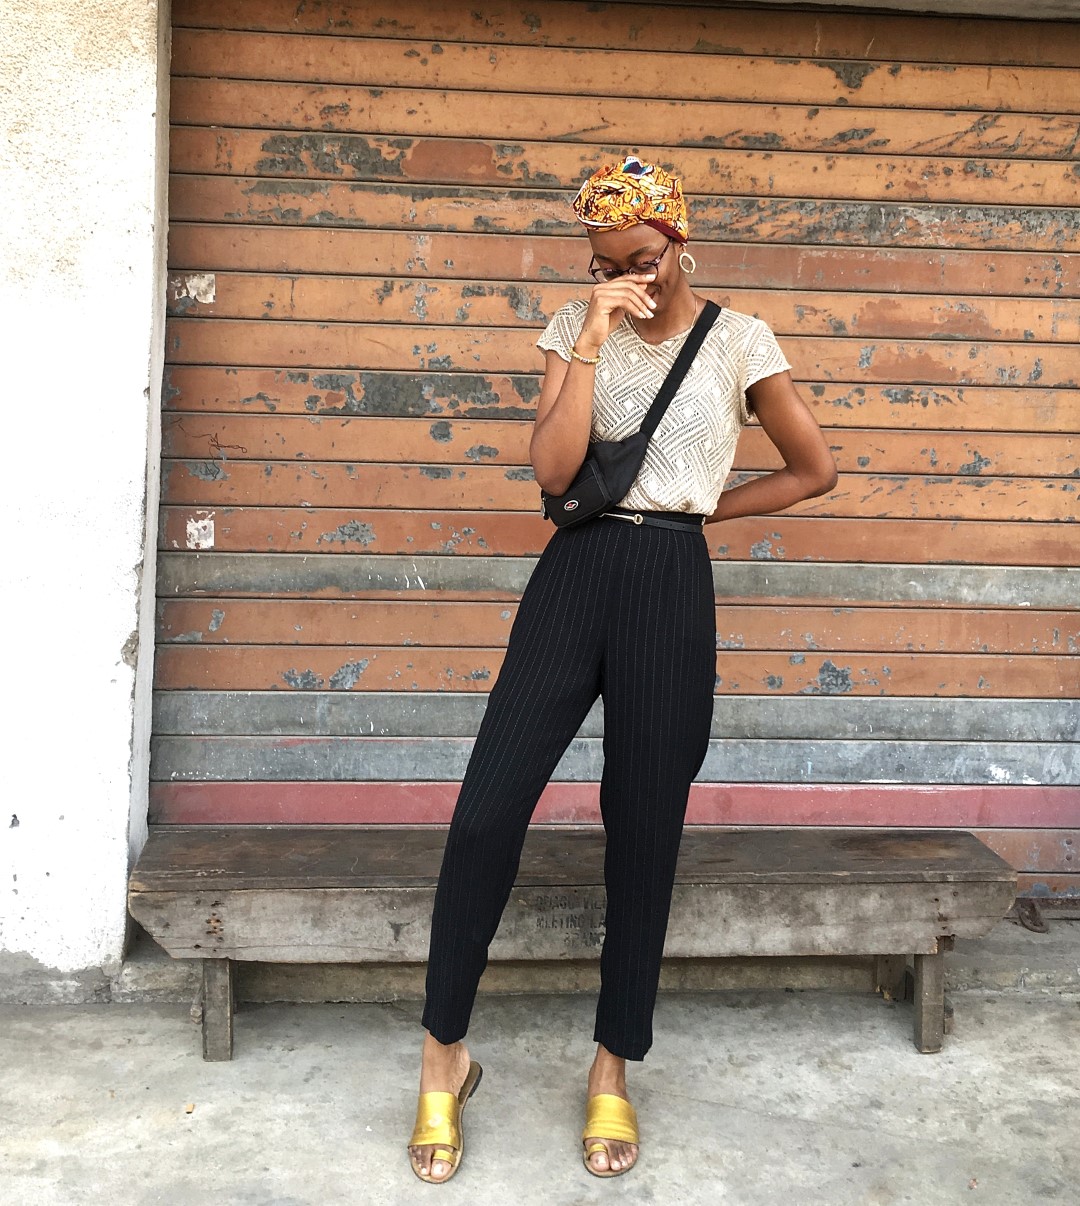 Nigerian fashion blogger Cassie Daves taking stock for February